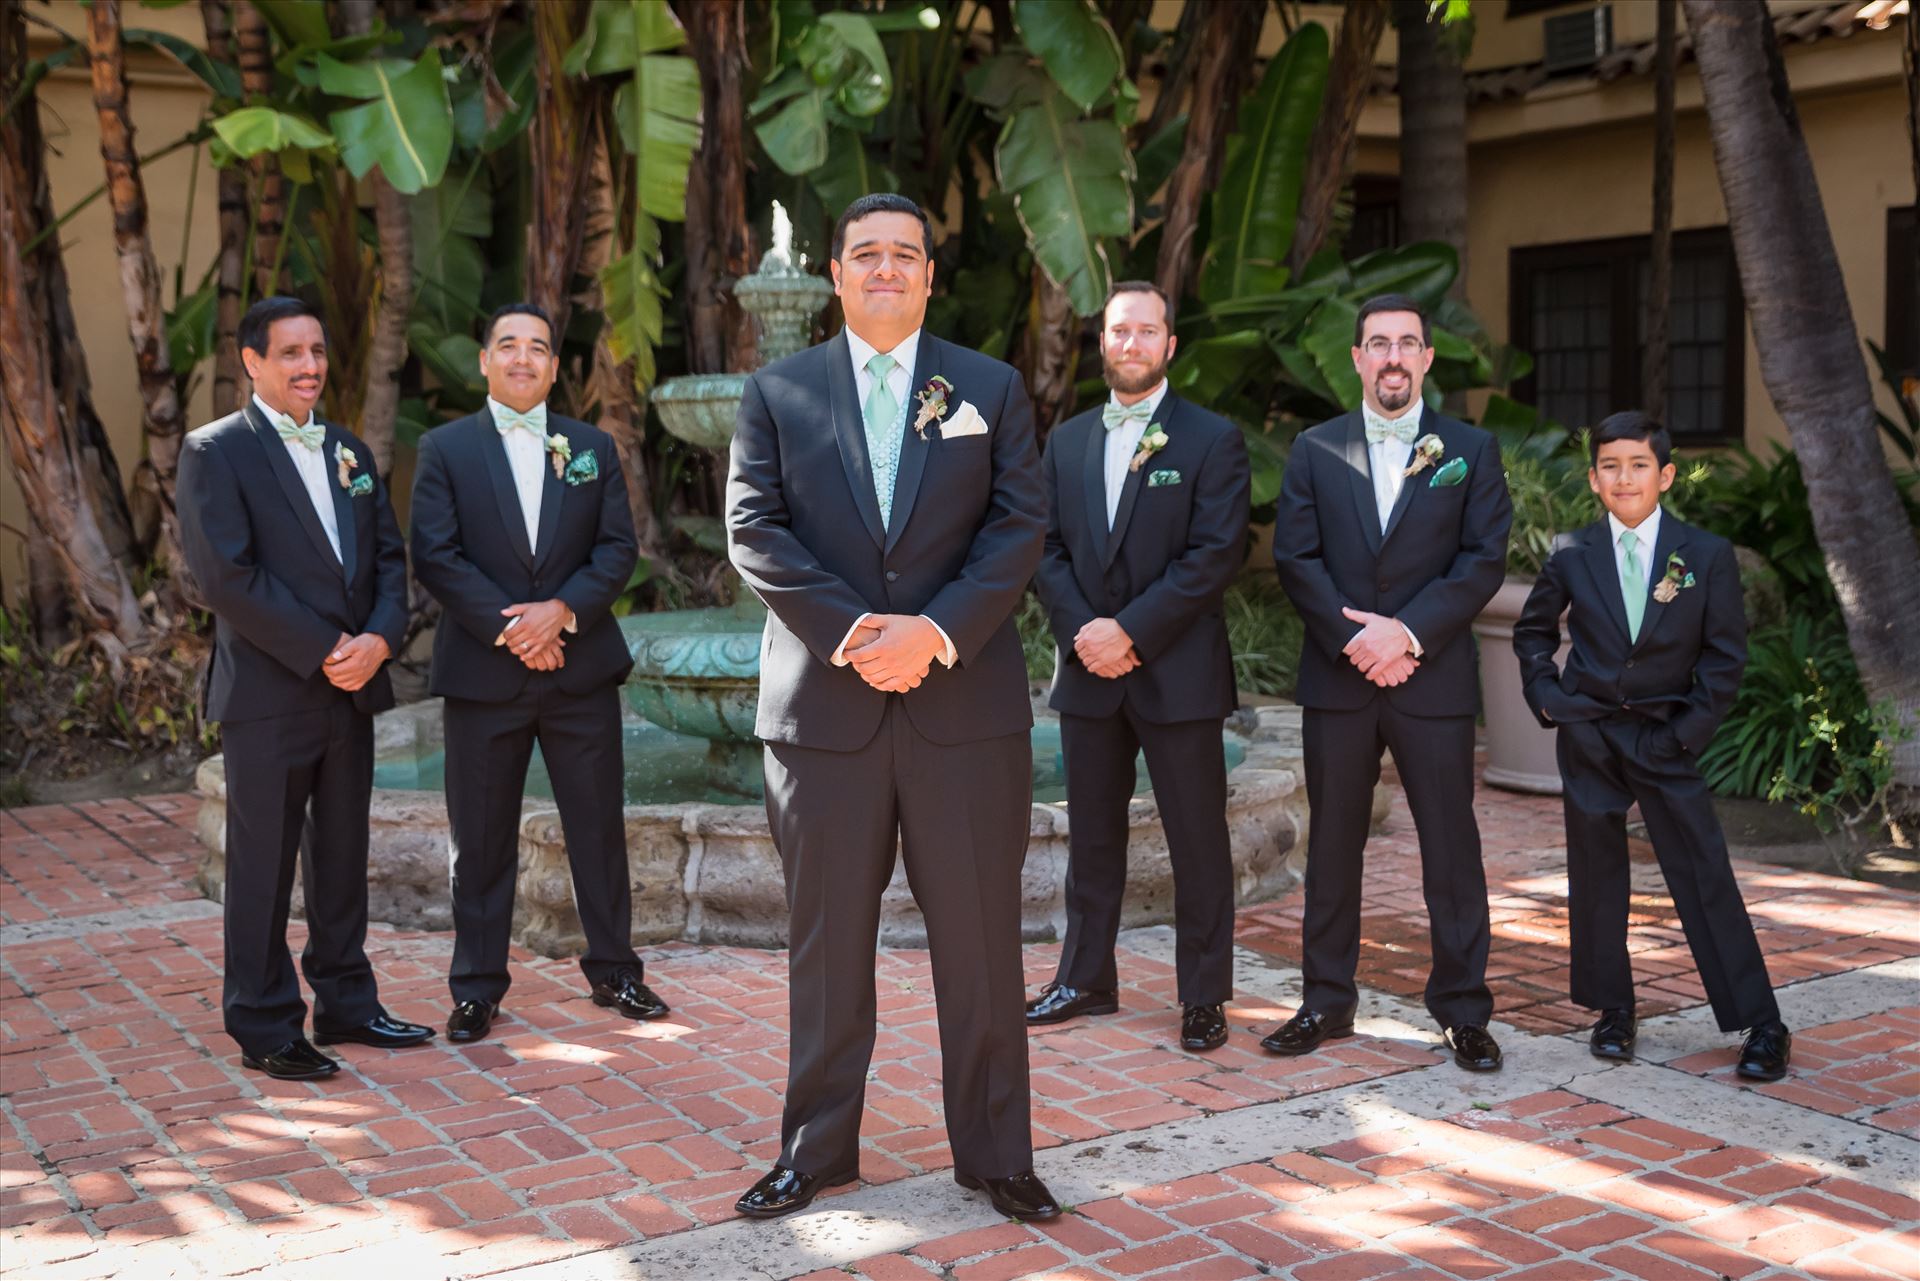 Mary and Alejandro 46 - Wedding photography at the Historic Santa Maria Inn in Santa Maria, California by Mirror's Edge Photography. Groom and his groomsmen by the fountain by Sarah Williams